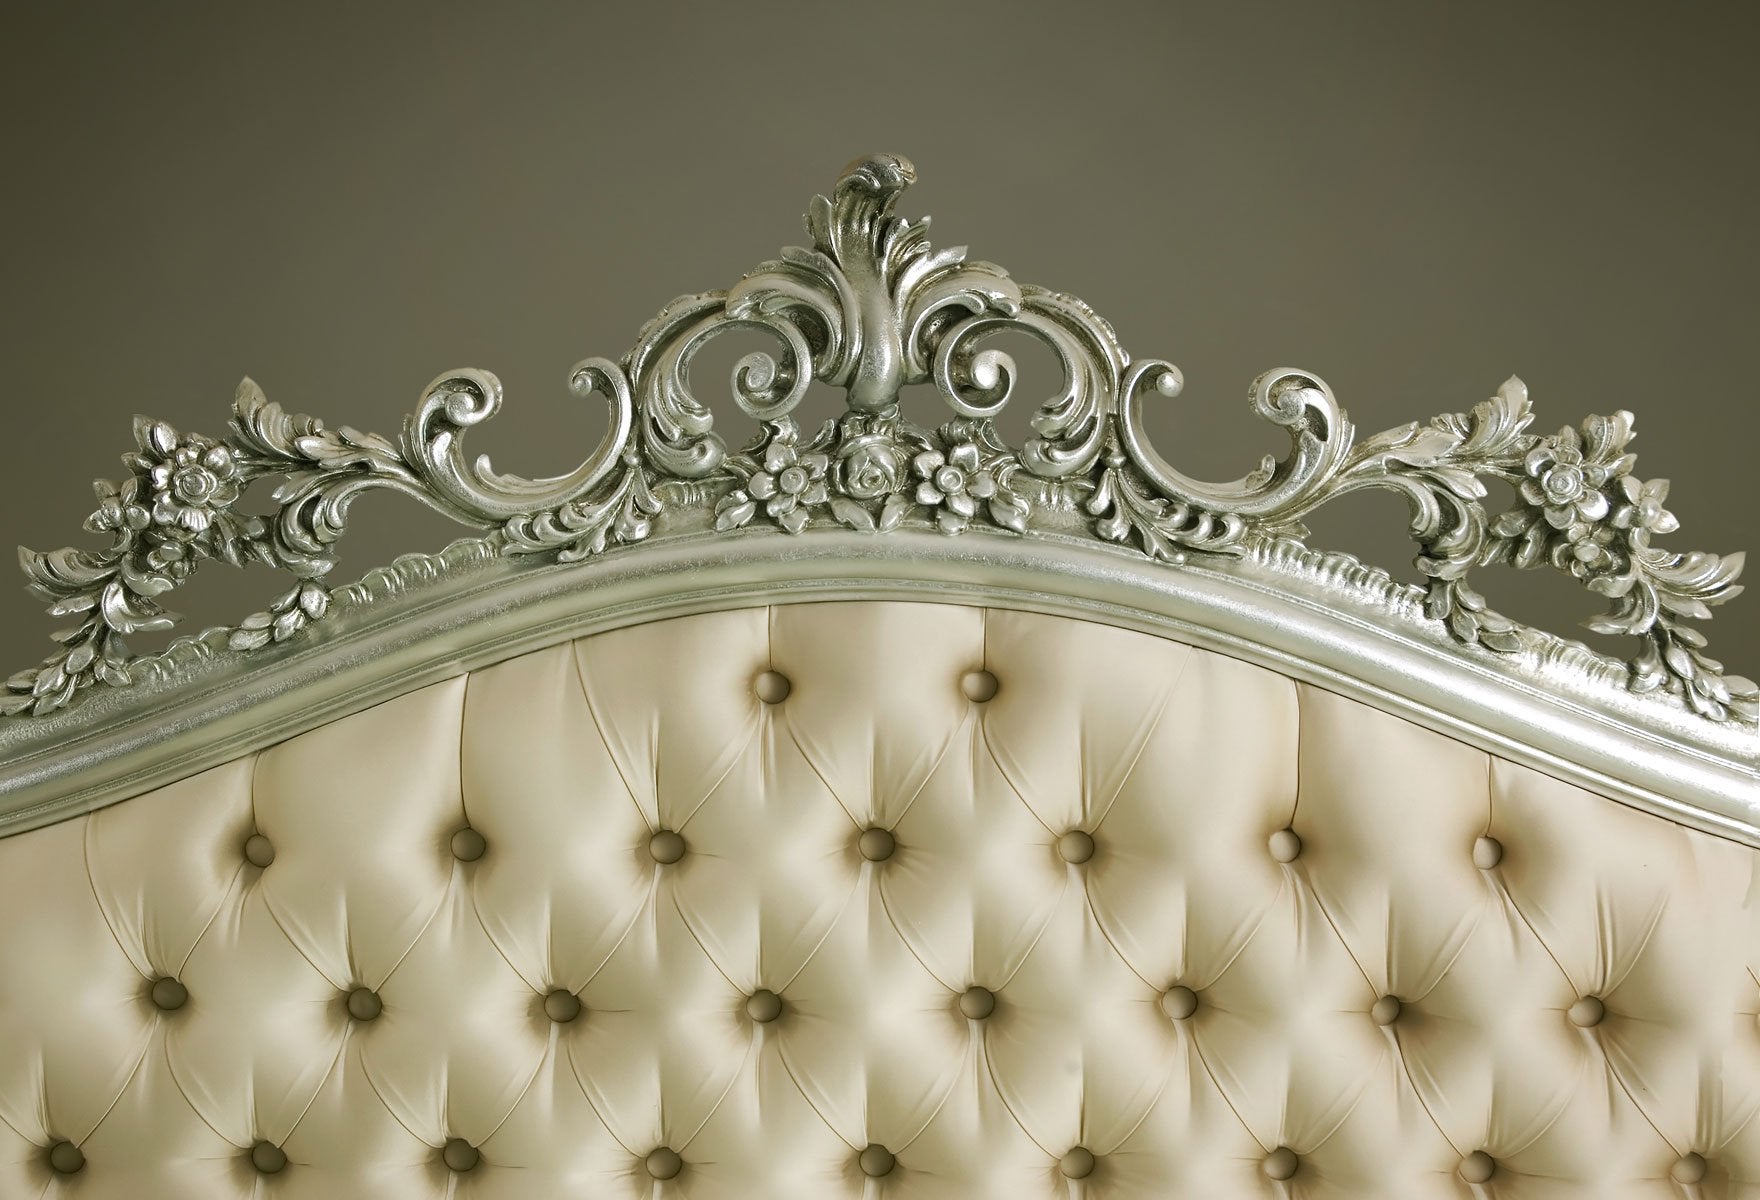 Katebackdrop：Kate Luxury cream color Headboard with Silver Legs  backdrop for Photogarphy